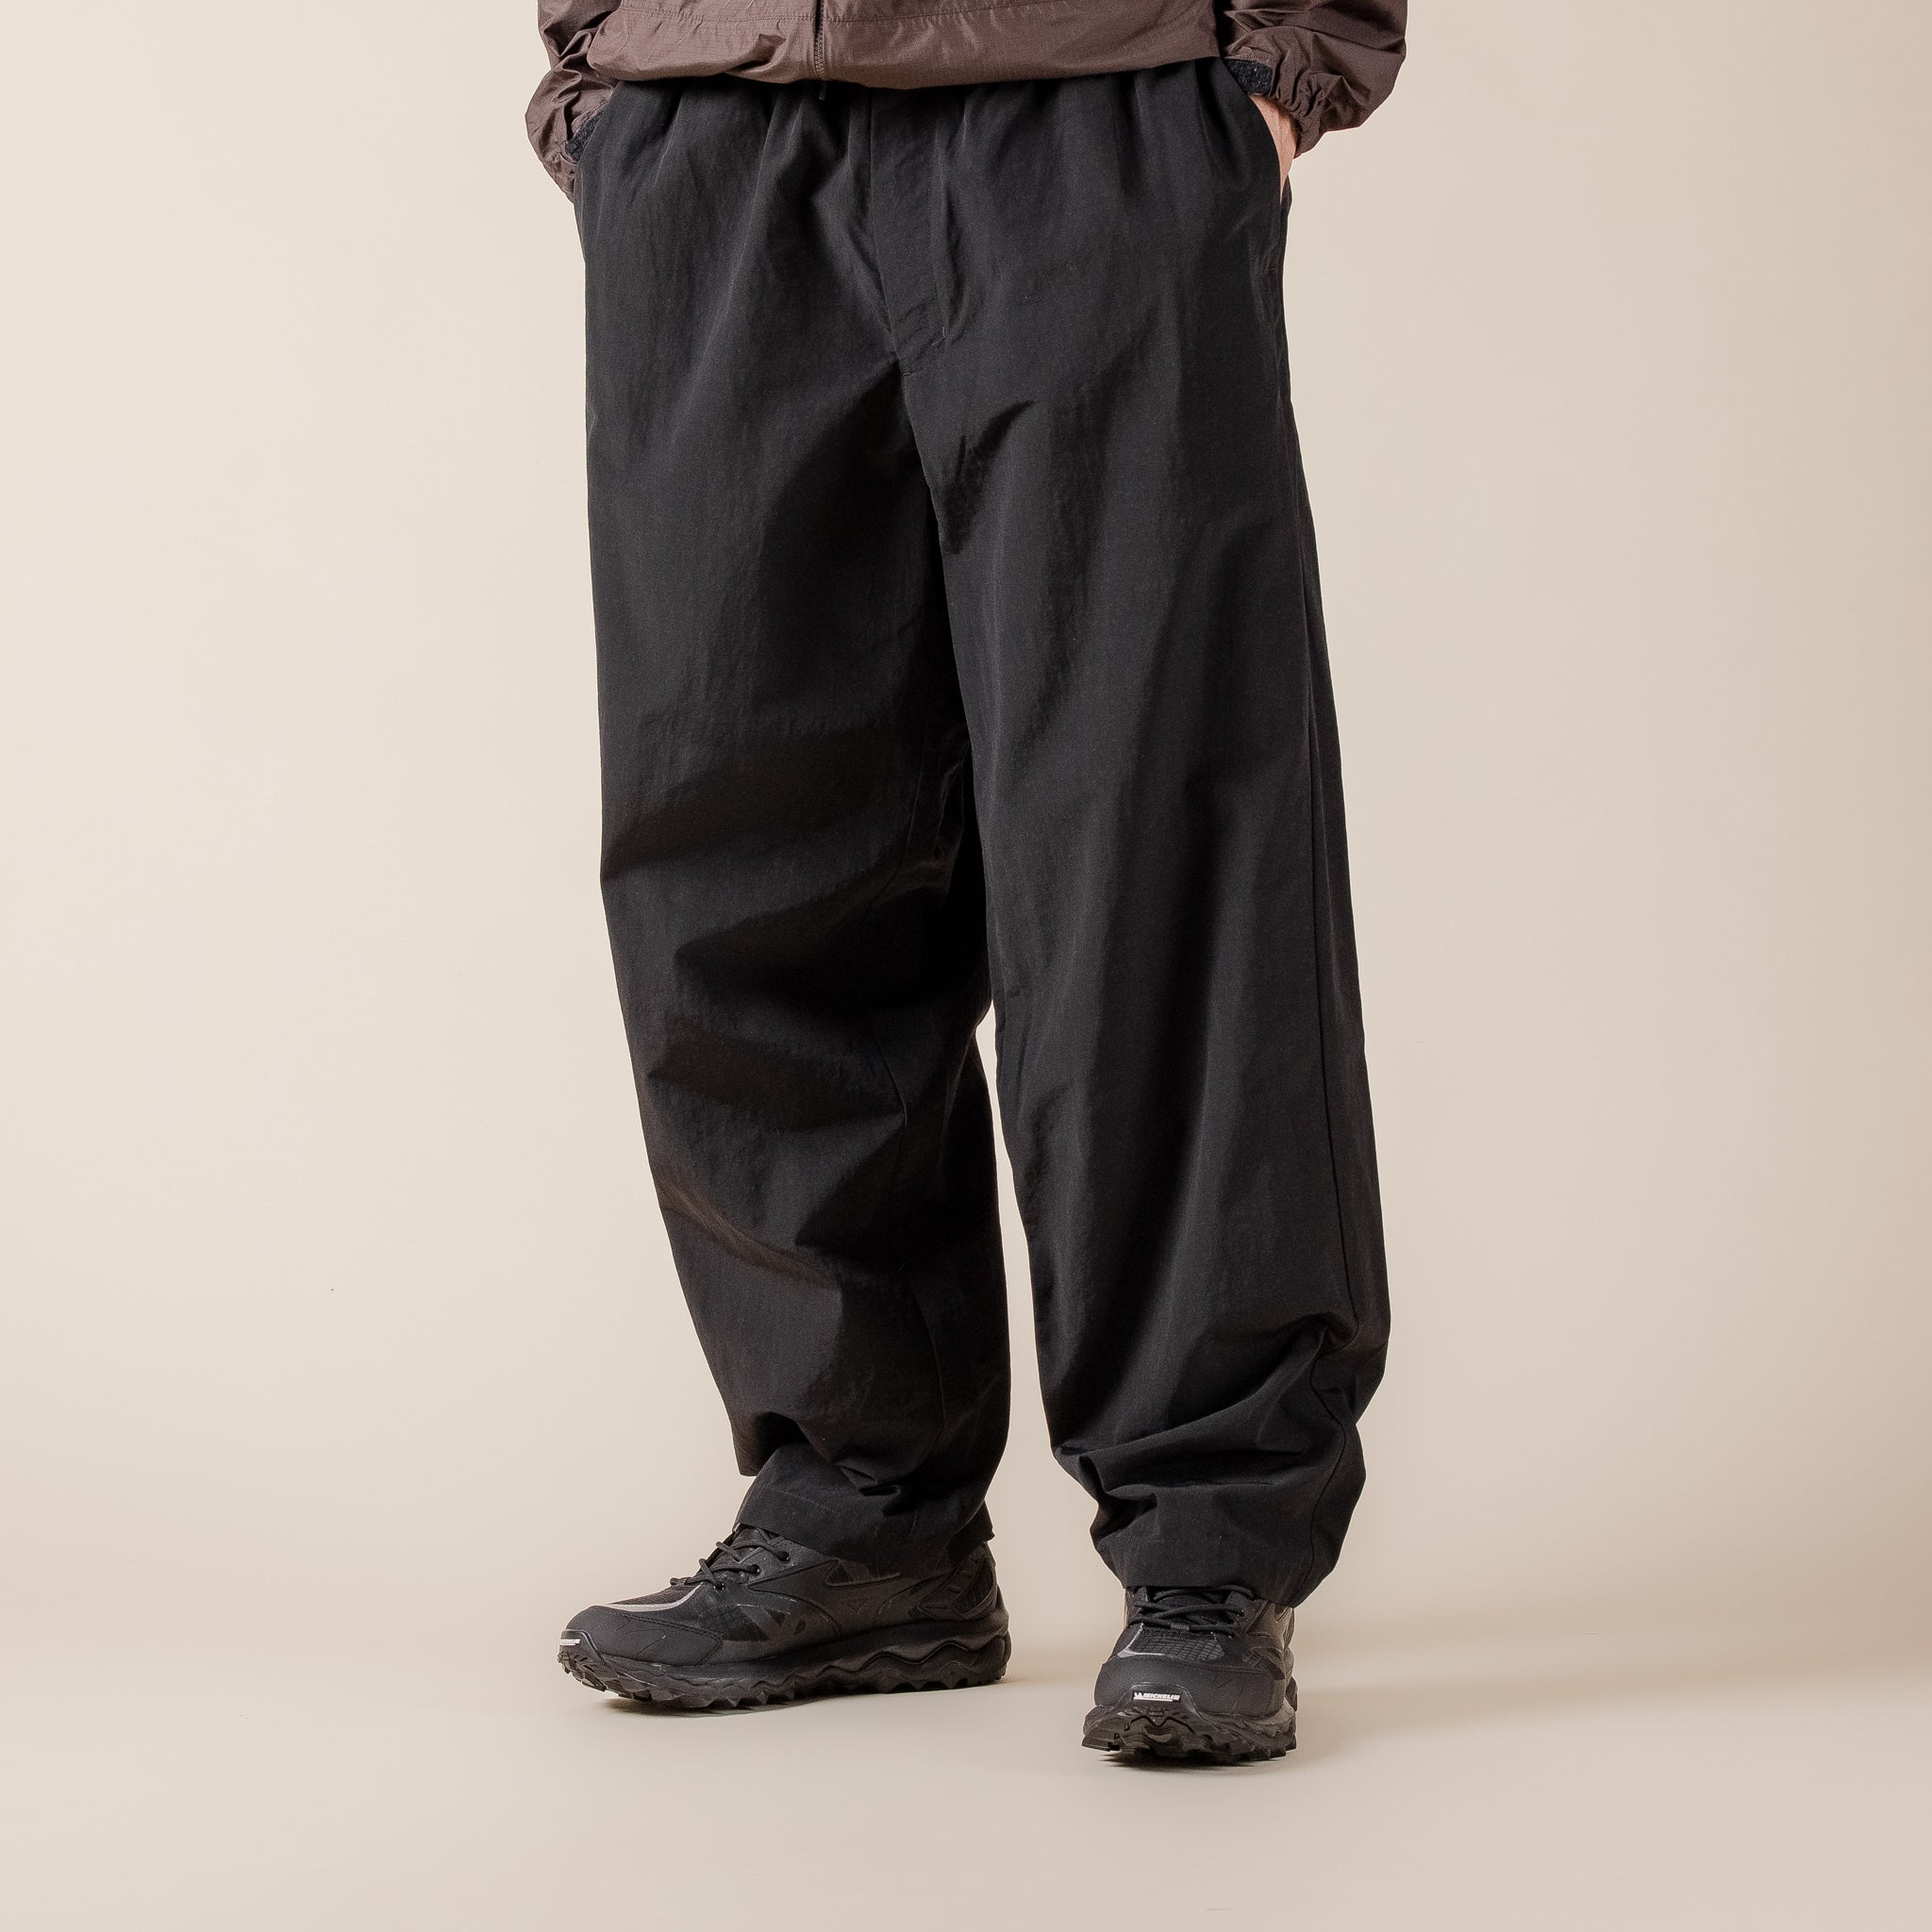 Goldwin - Relaxed Straight Easy Pants - Black GL73179 "Goldwin stockists" "Goldwin sale" "Goldwin jacket" "Goldwin gore-tex"